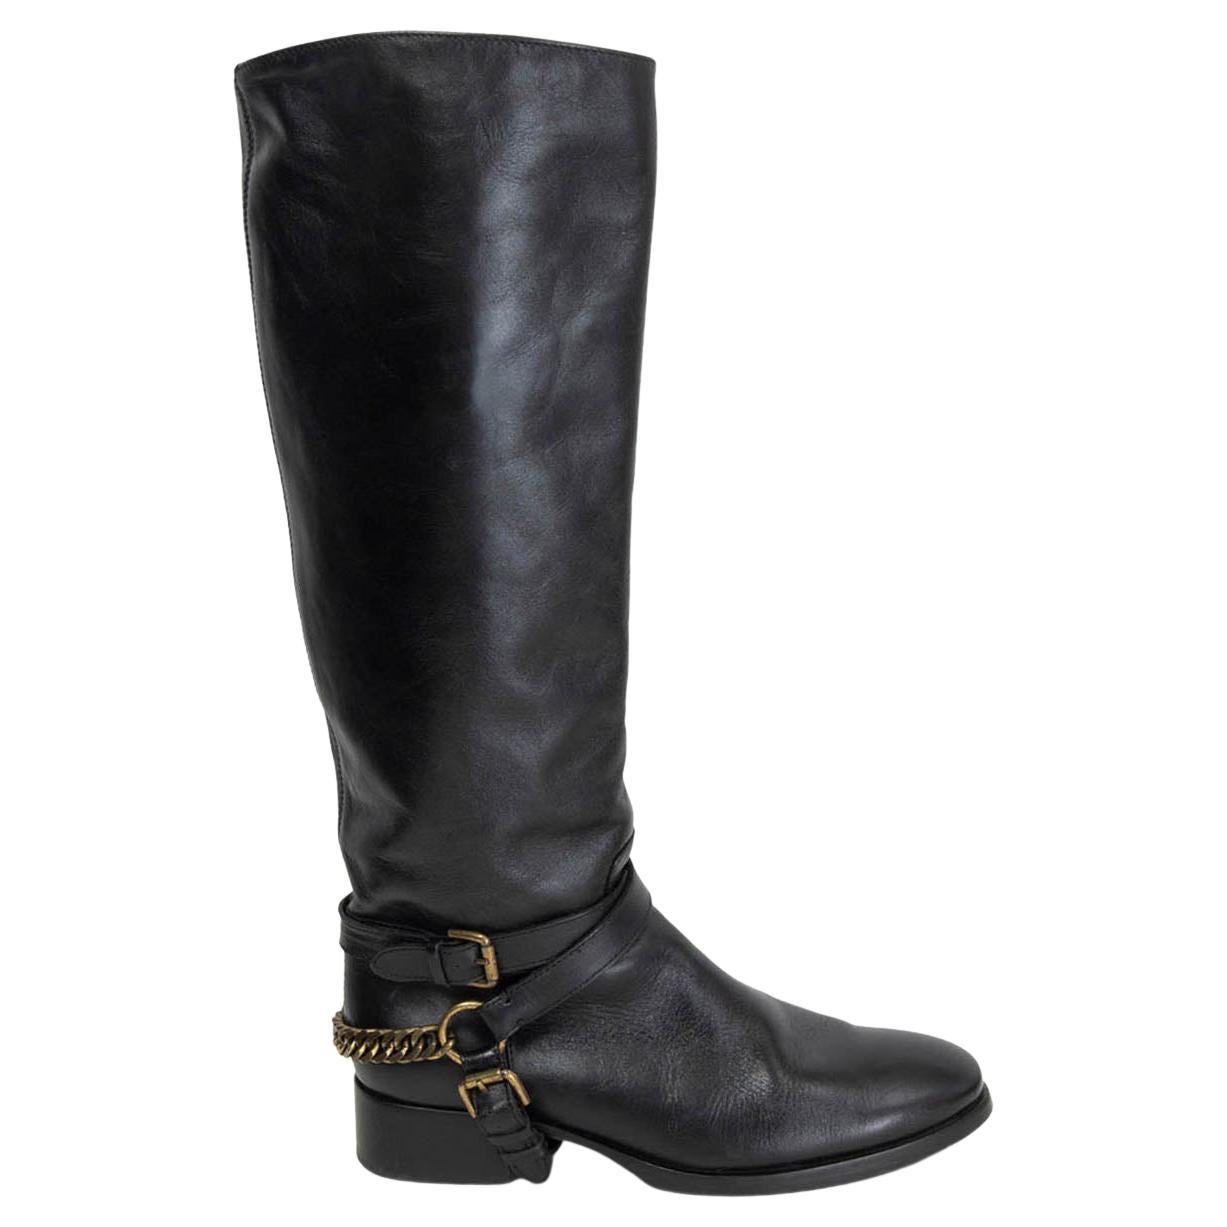 McQ ALEXANDER MCQUEEN black leather CHAIN HALTER RIDING Boots Shoes 39 For Sale